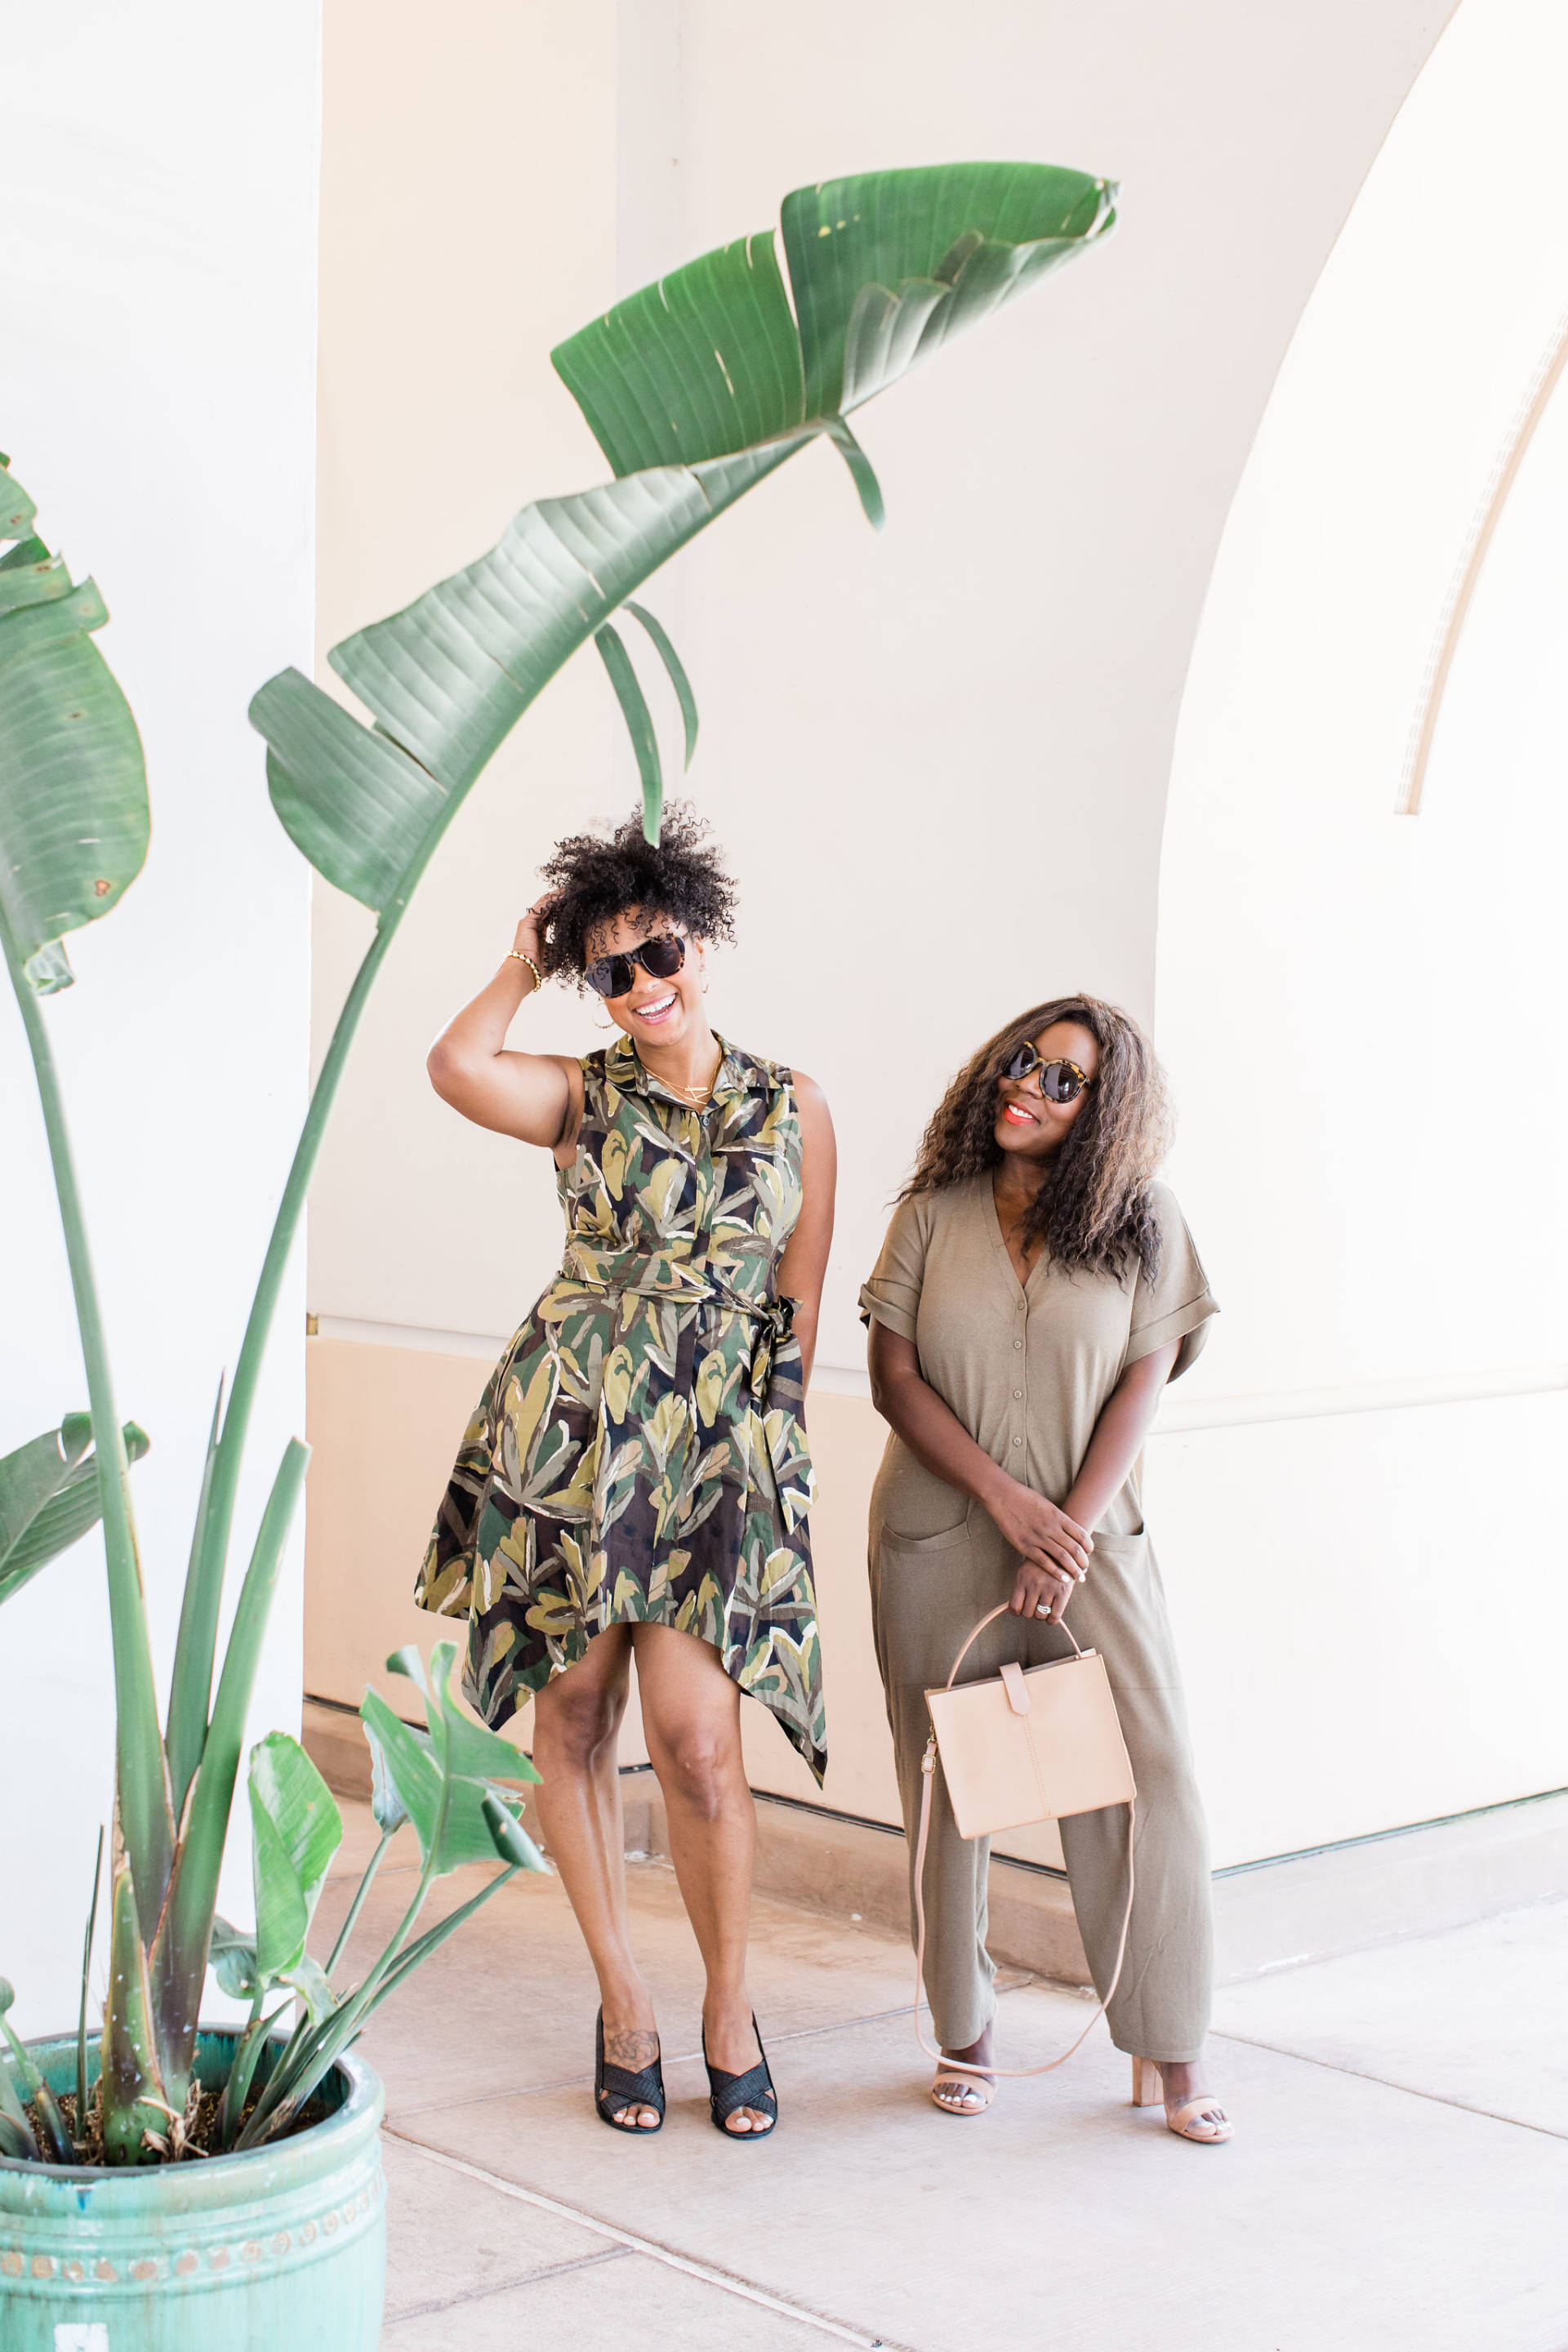 Two women dressed beautifully under an indoor palm tree